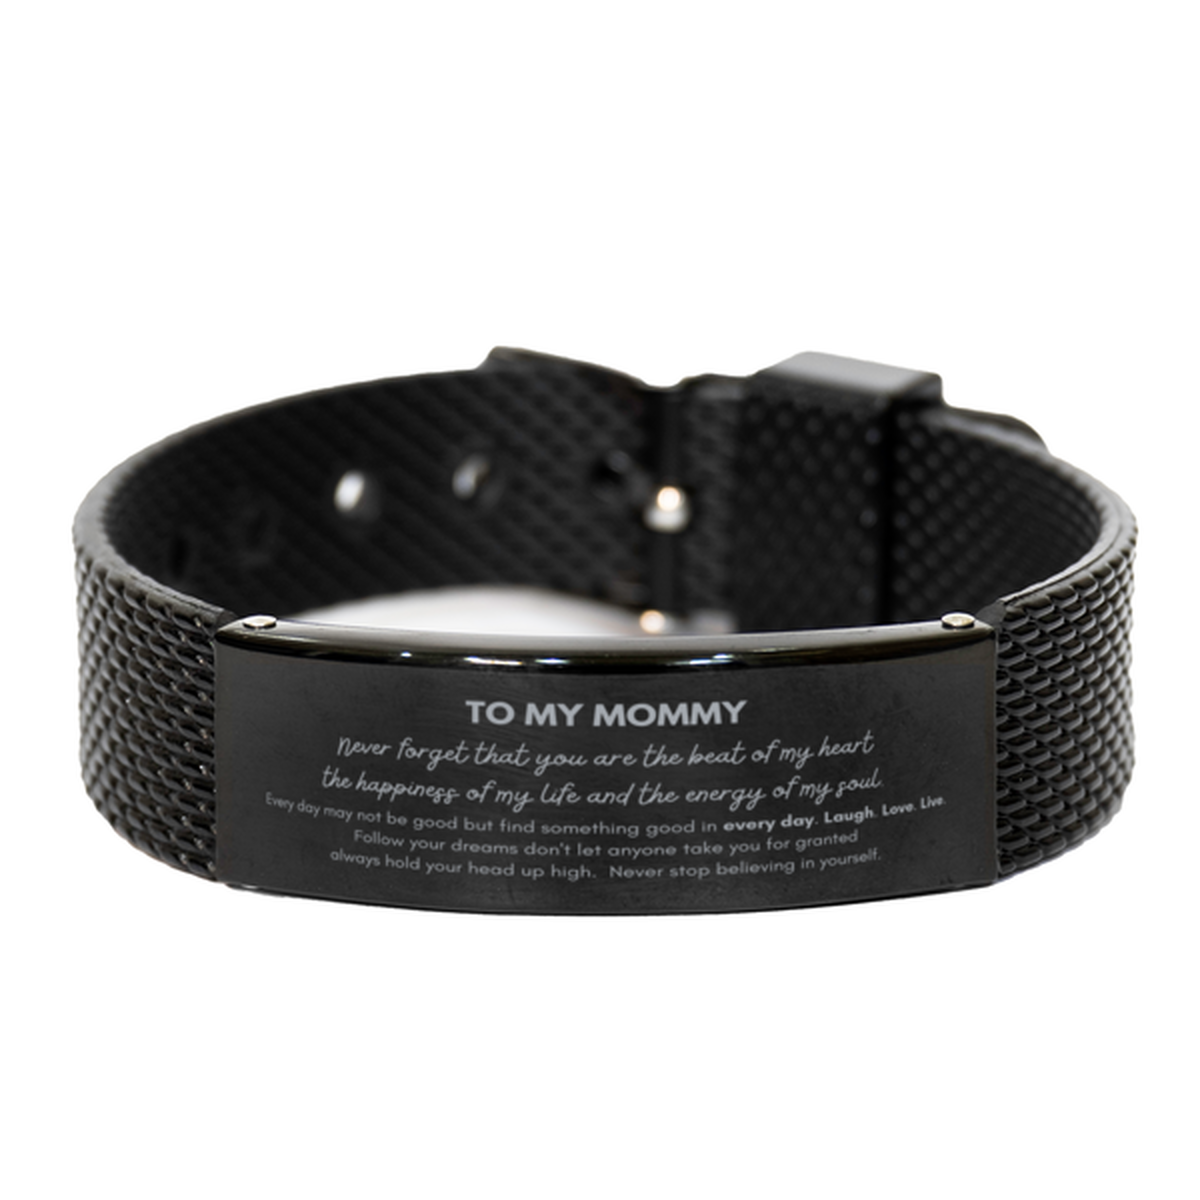 To My Mommy Bracelet Gifts, Christmas Mommy Black Shark Mesh Bracelet Present, Birthday Unique Motivational For Mommy, To My Mommy Never forget that you are the beat of my heart the happiness of my life and the energy of my soul